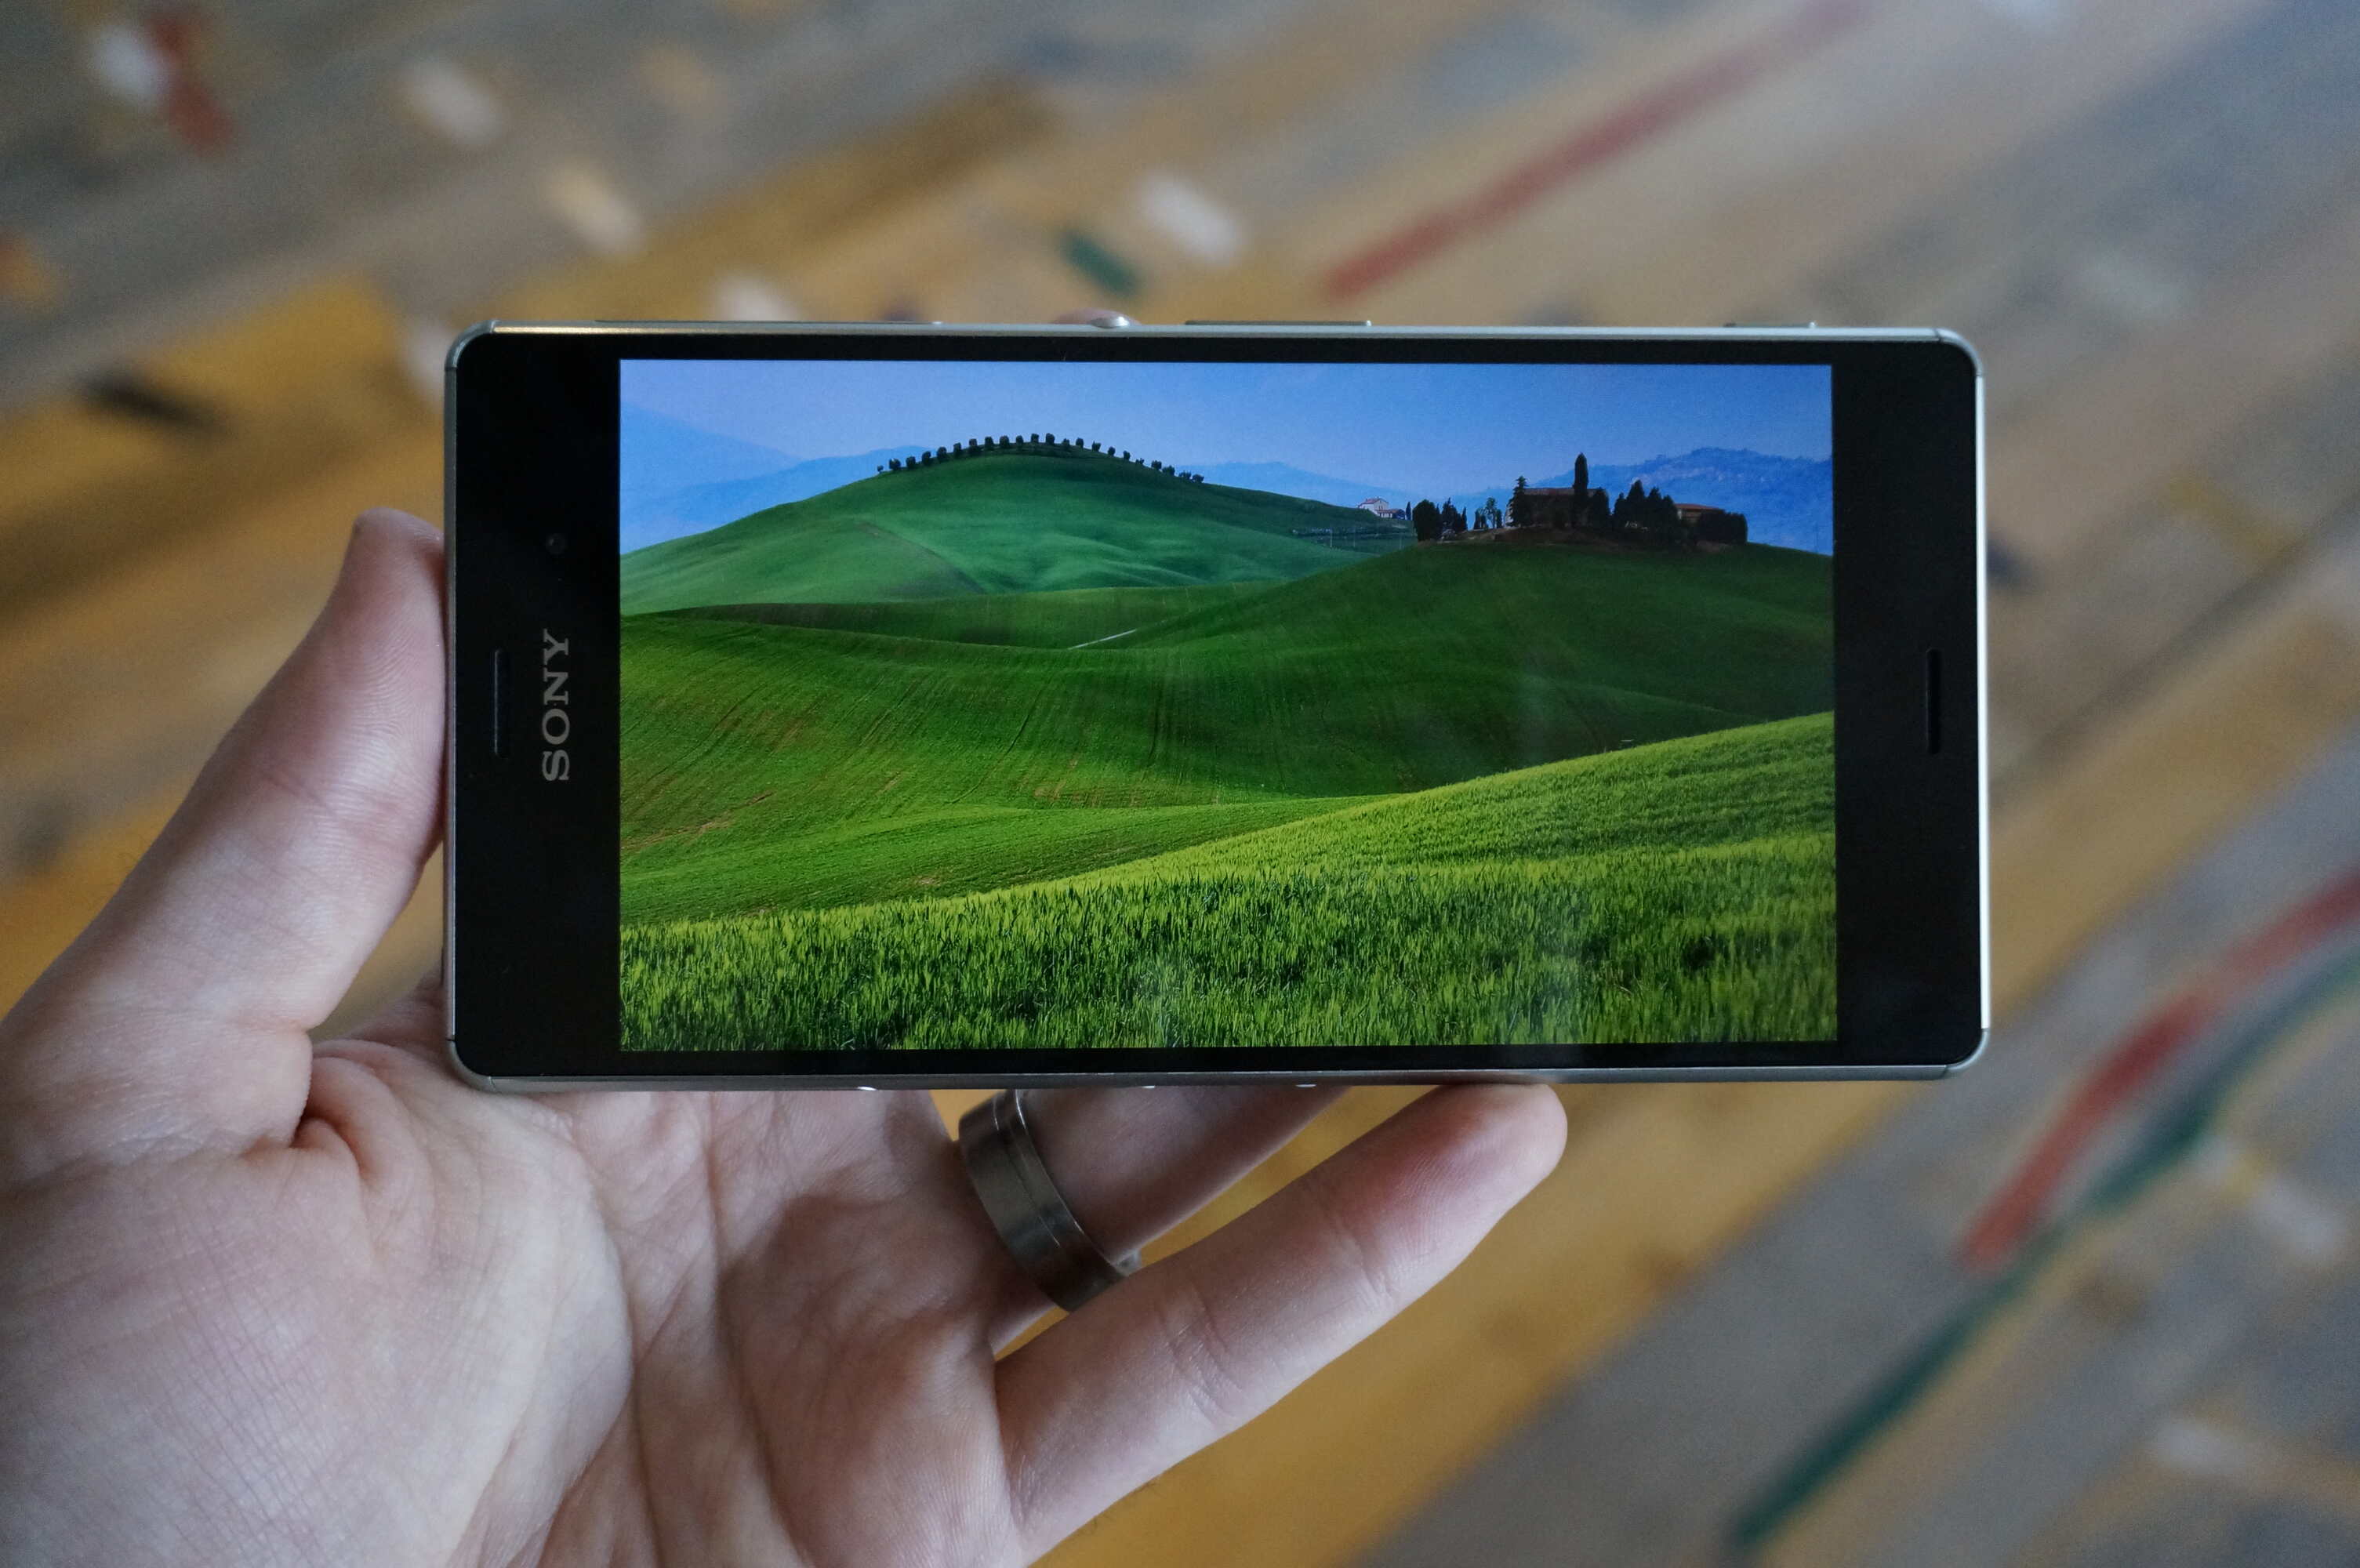 capture-your-xperia-z3-screen-a-step-by-step-screenshot-tutorial